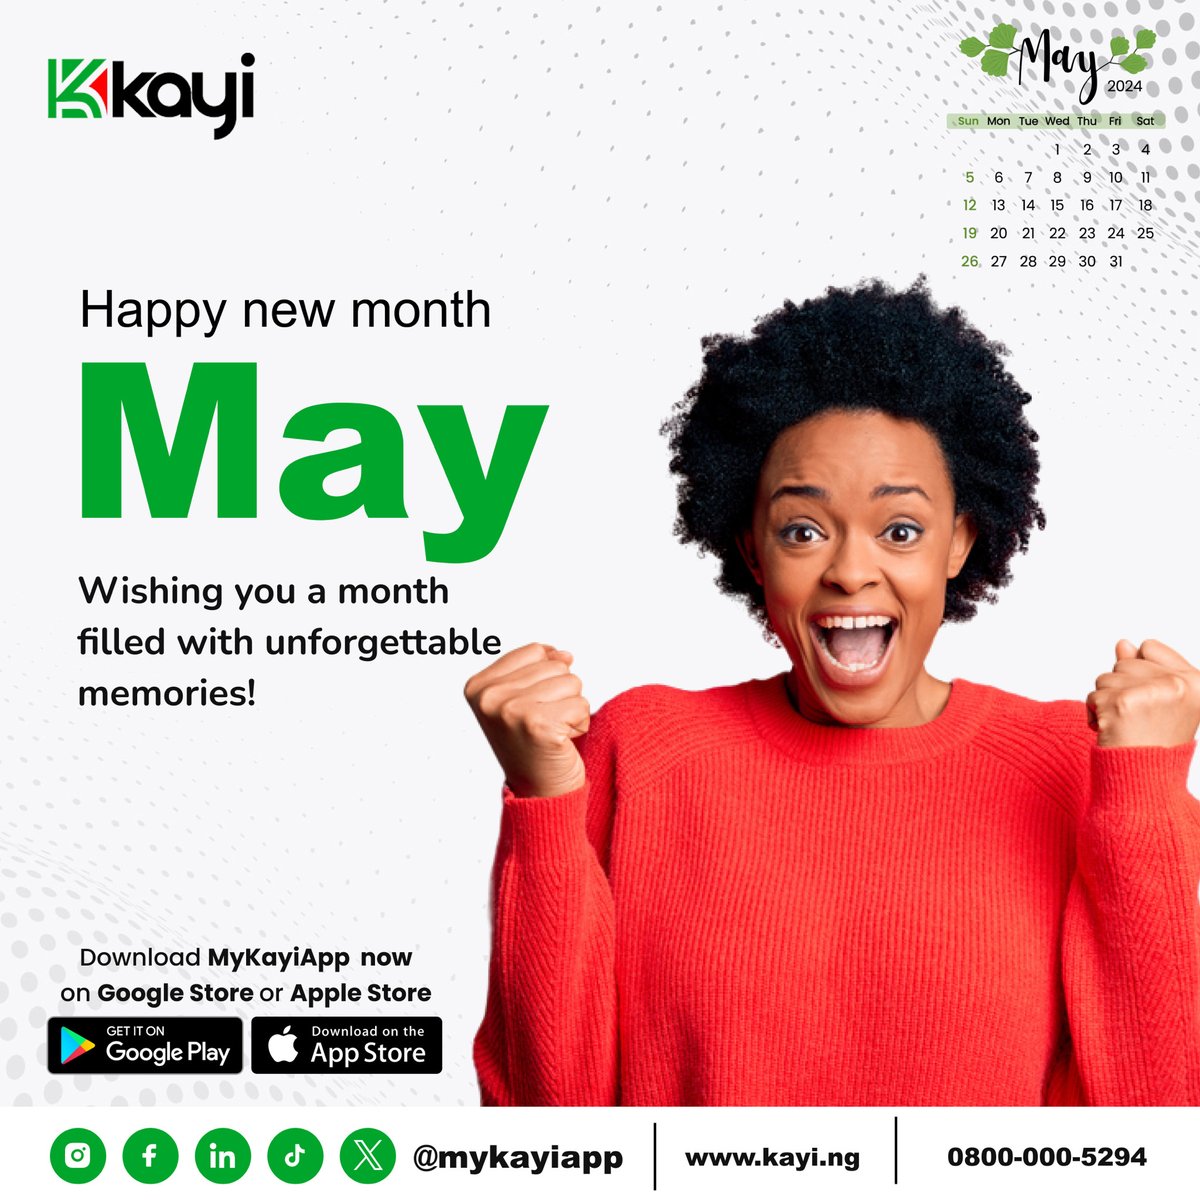 Let's make May unforgettable! Begin your journey of financial inclusion, revolutionized and traditional banking by downloading Kayiapp from the Google Store or Apple Store. Here's to an incredible month ahead!

#MyKayiApp #NowLive #Kayiway #DownloadNow #downloadmykayiapp